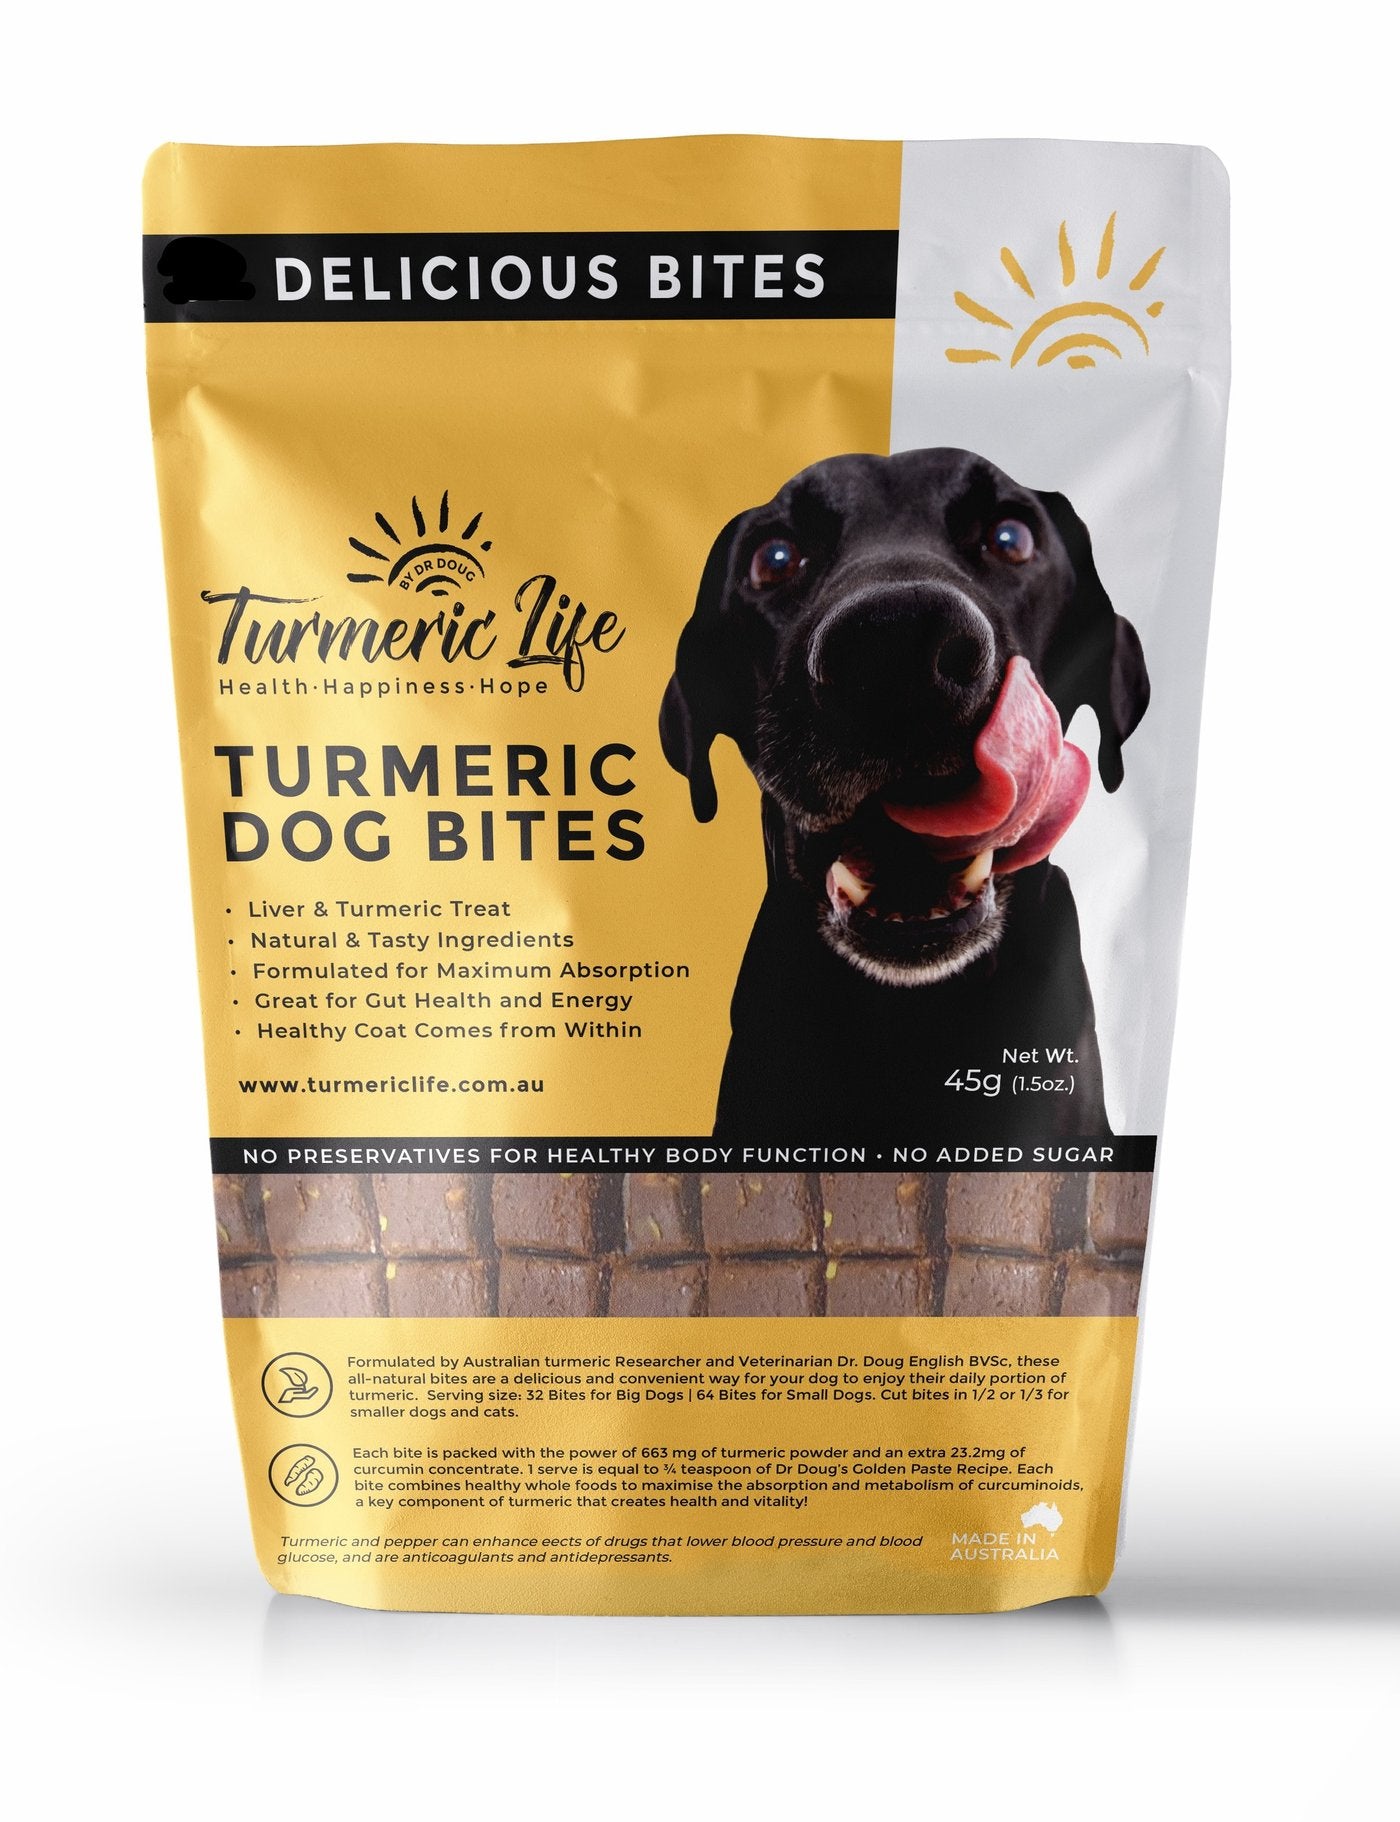 how many mg of turmeric can i give my dog